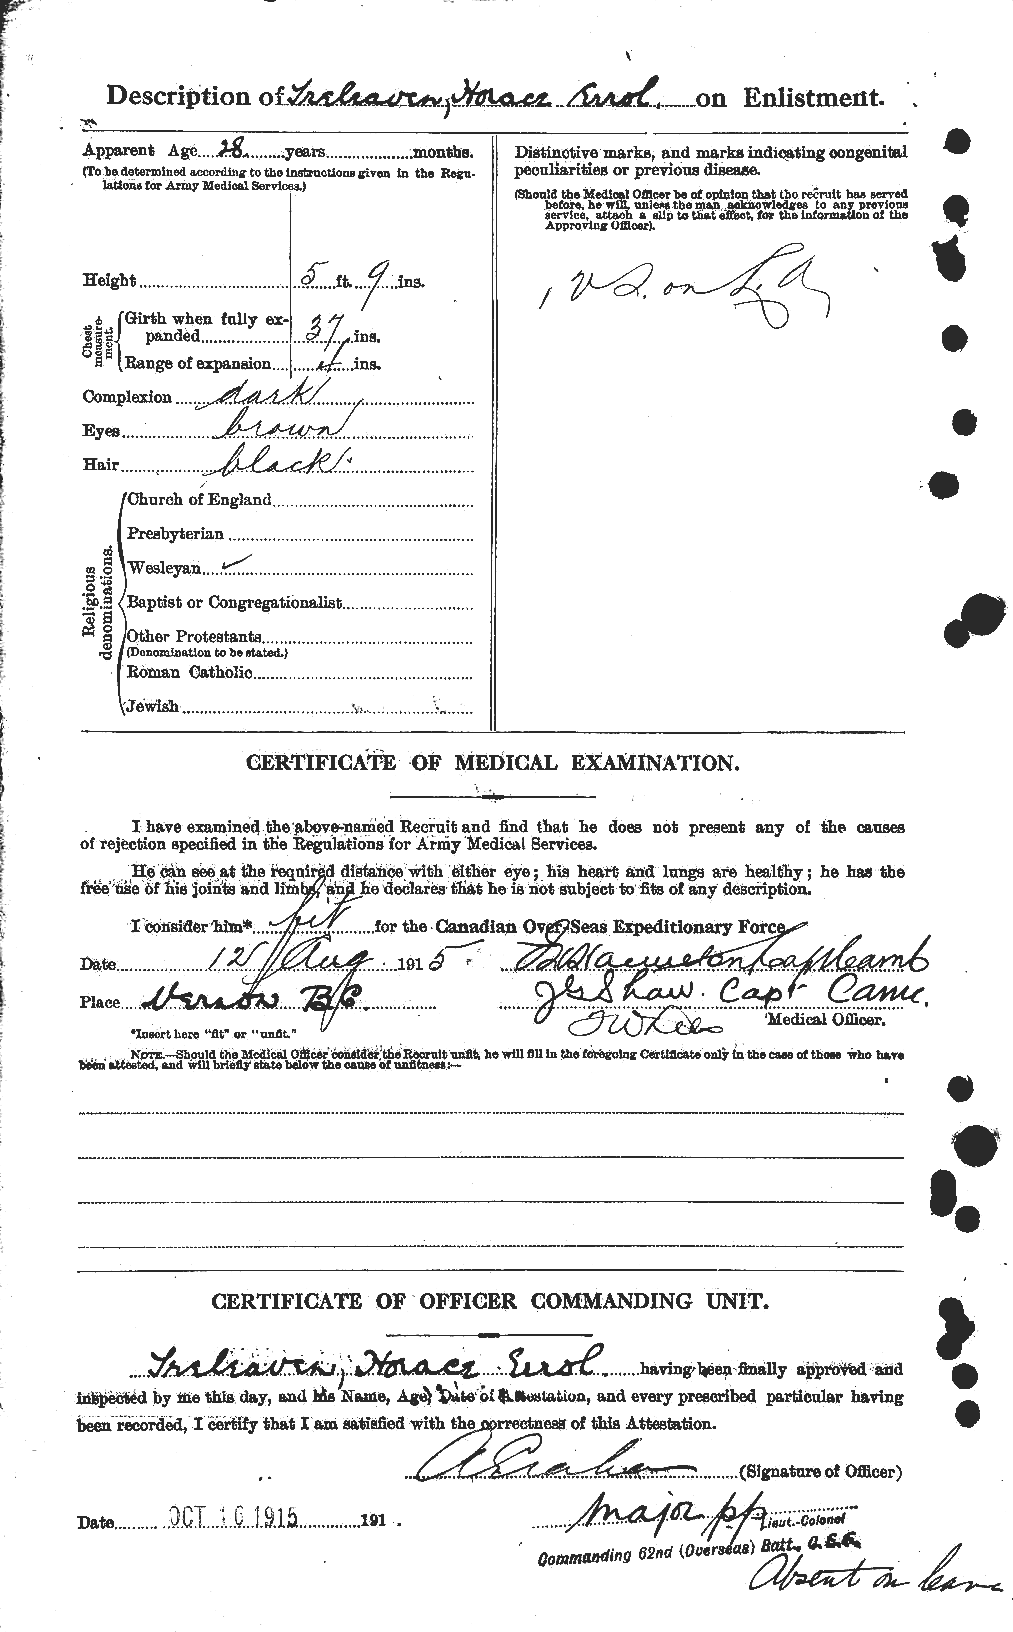 Personnel Records of the First World War - CEF 637483b